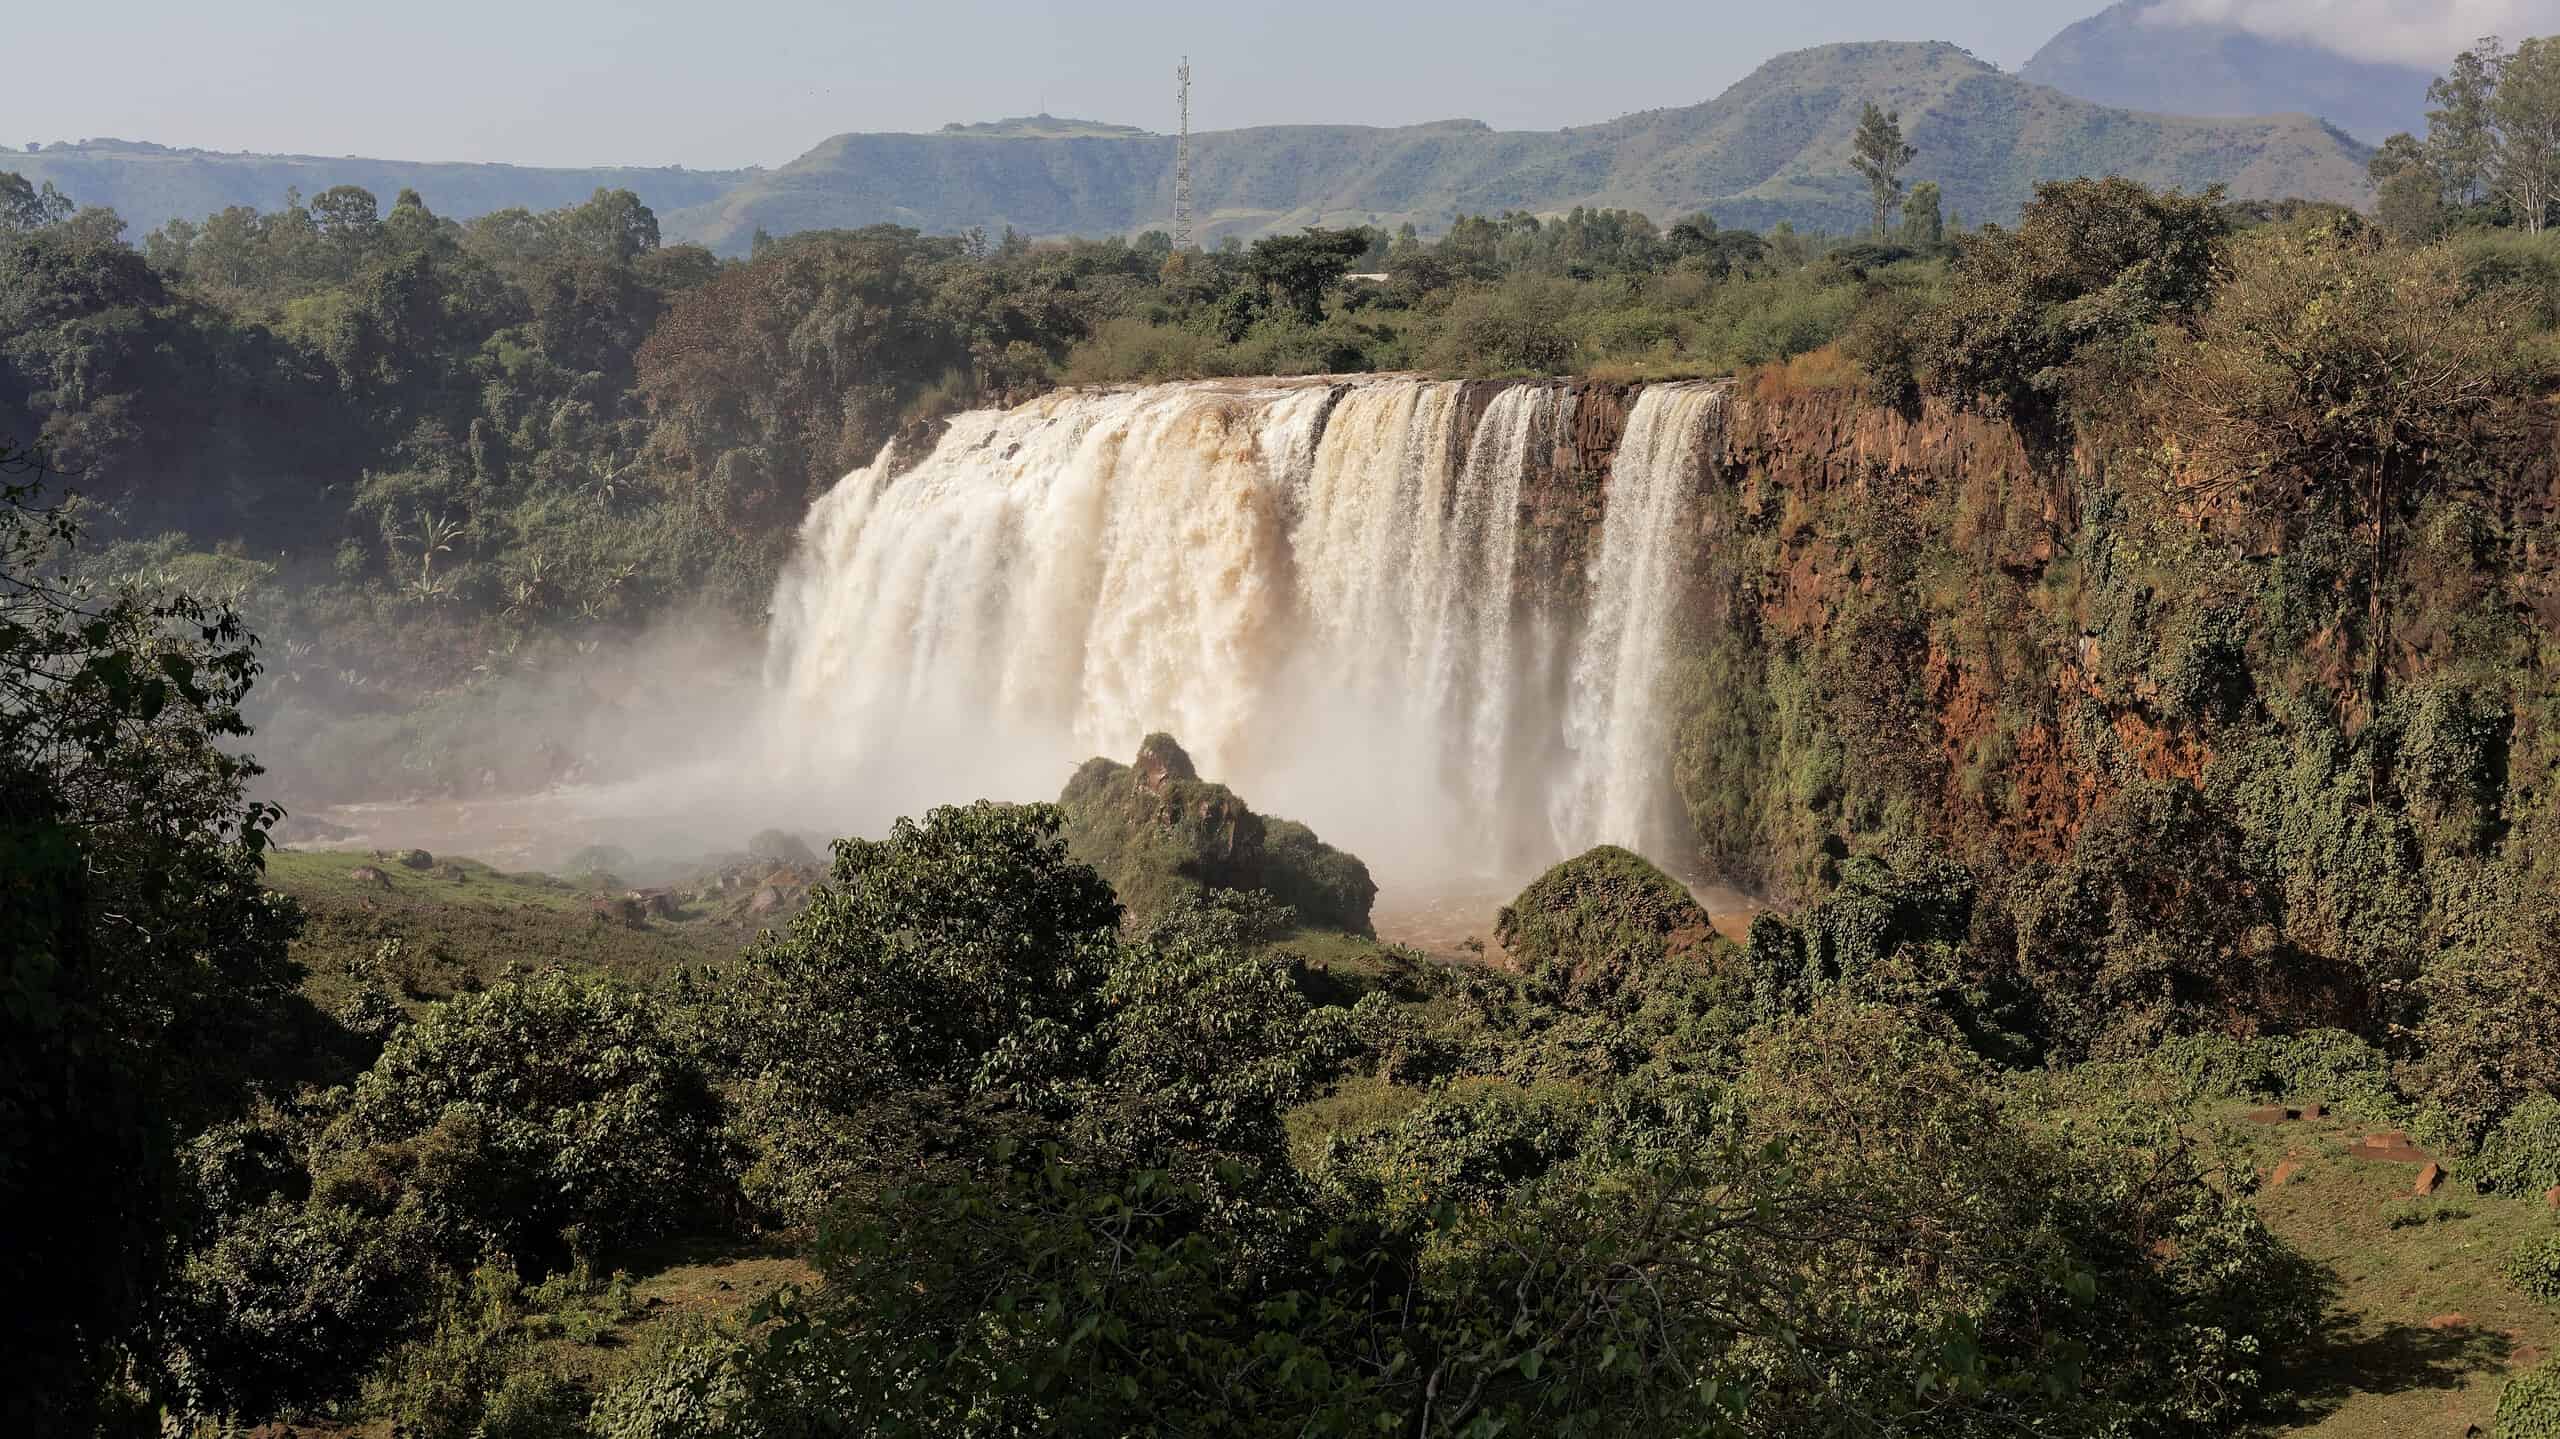 Bahir Dar is closely located near the breathtaking Blue Nile Falls